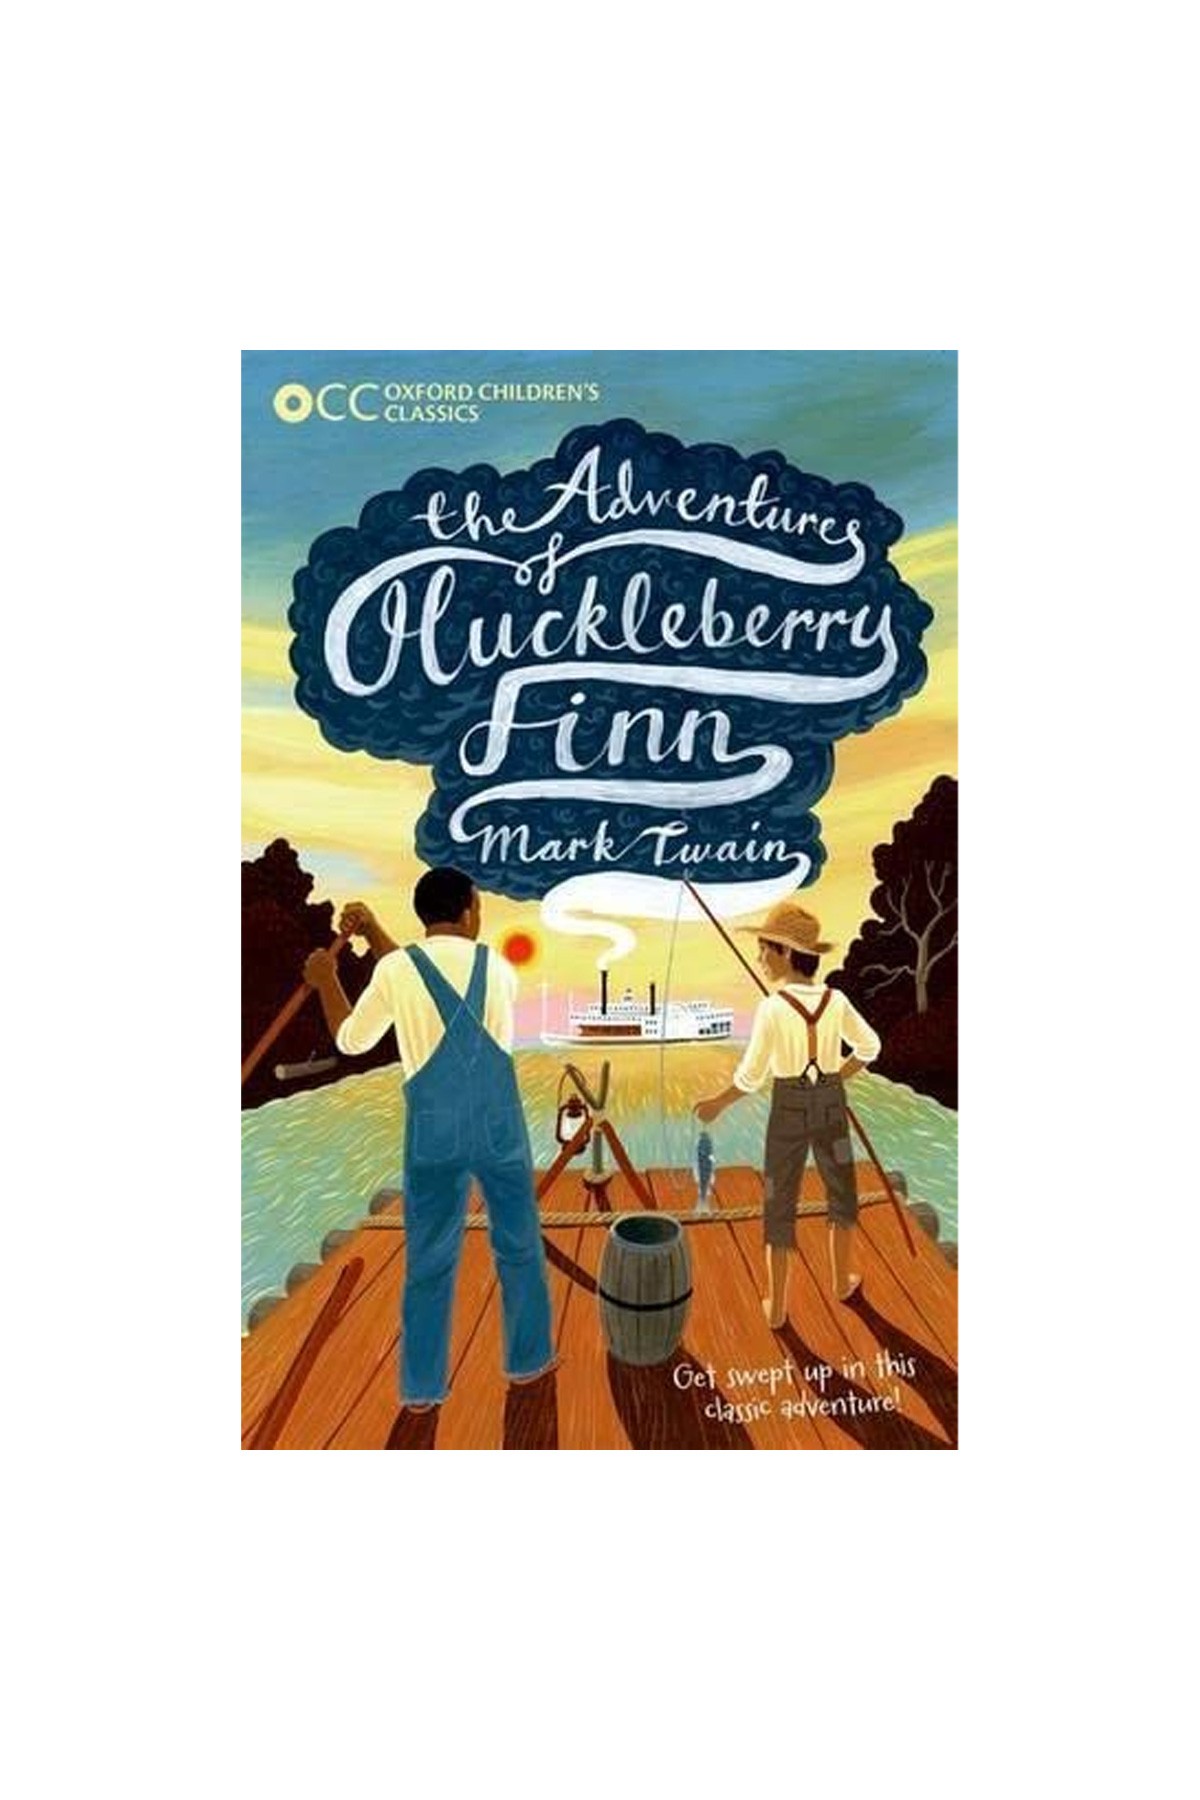 Oxford Childrens Book - Oxford ChildrenS Classics: The Adventures Of Huckleberry Finn